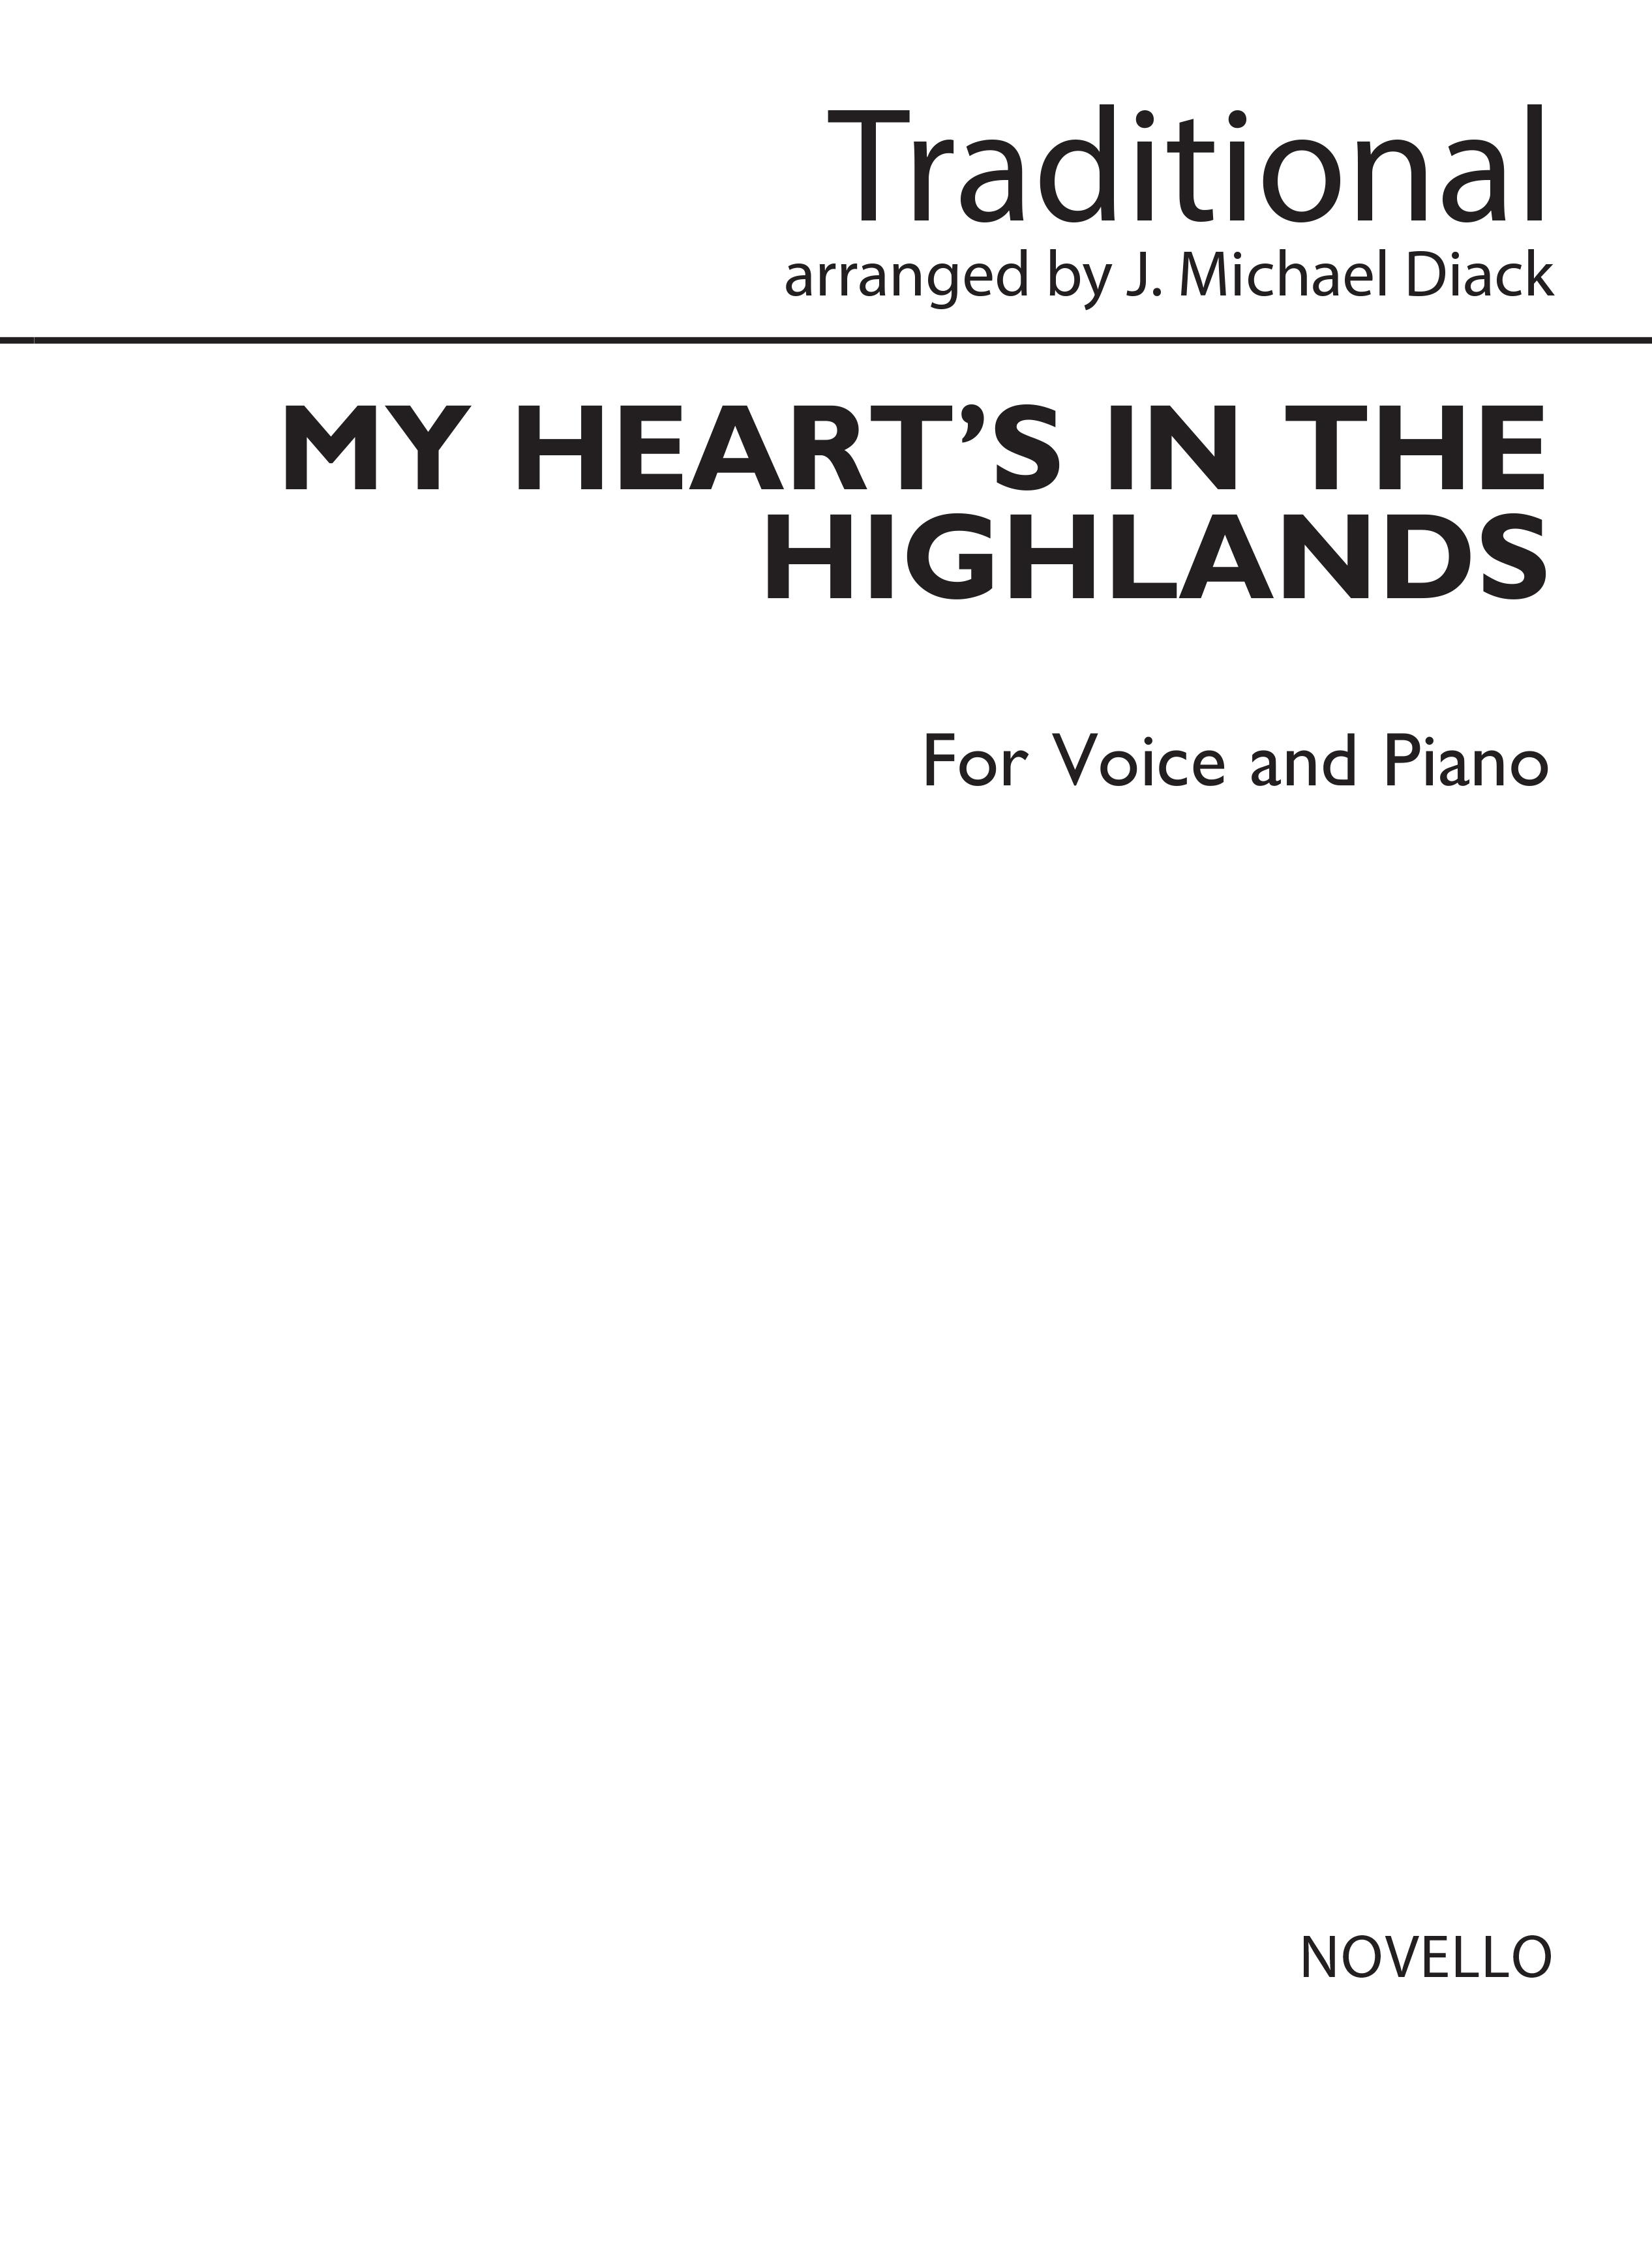 J. Michael Diack: My Heart's In The Highlands: Voice: Vocal Work